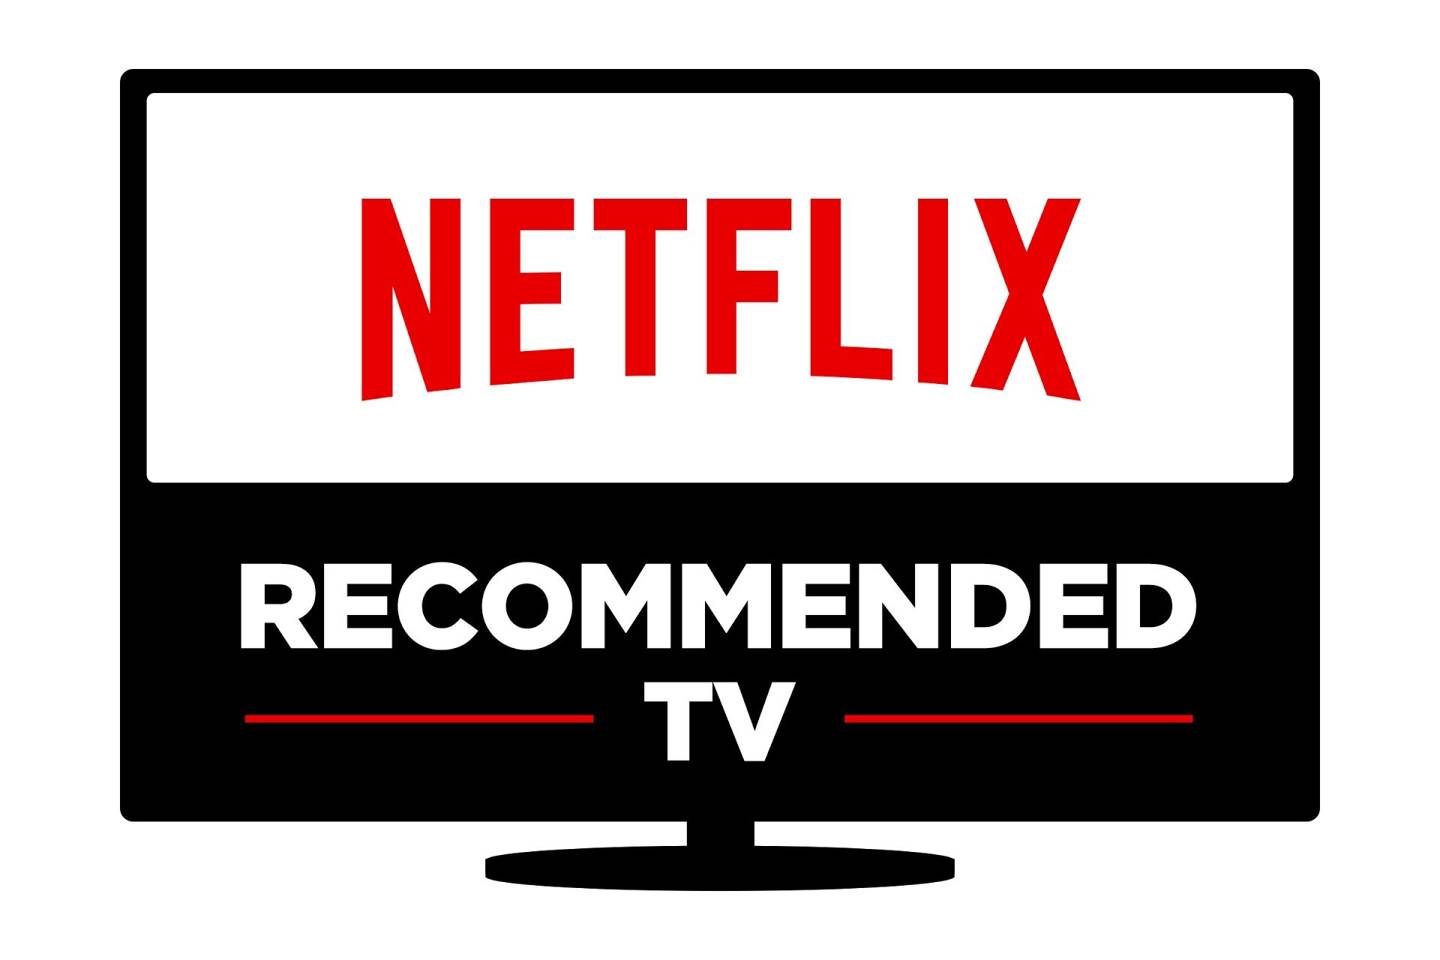 Netflix Recommended TVs for 2017 to include LG, Samsung and Sony